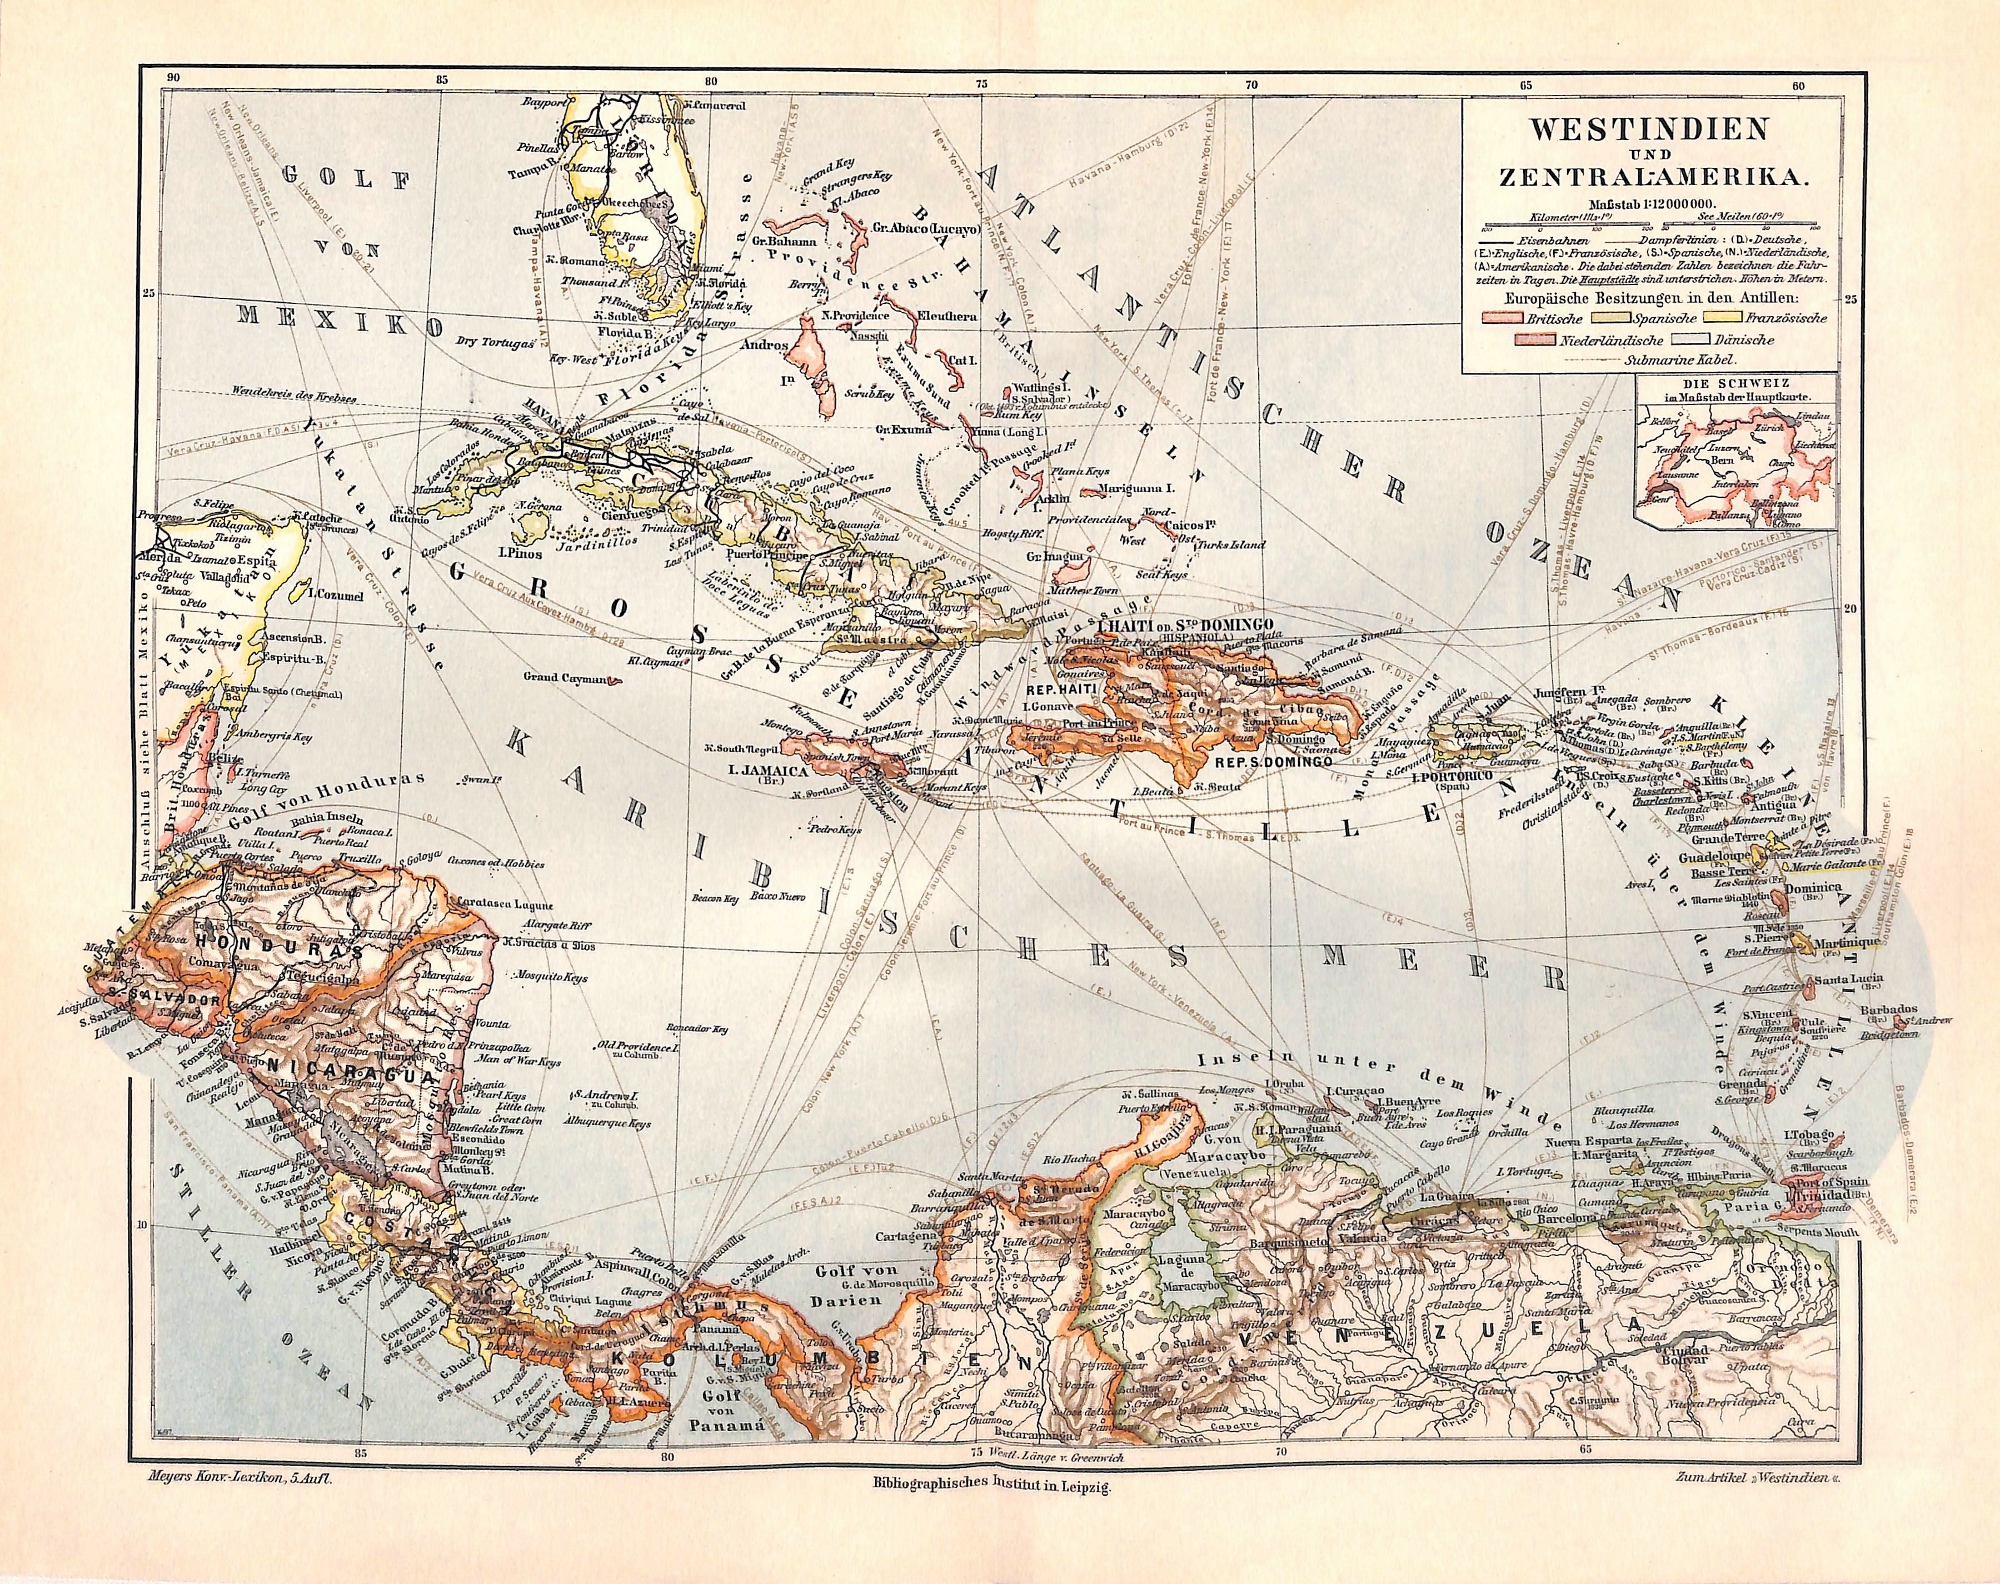 SOLD West Indies, Caribbean, Antilles, Central America, 1897